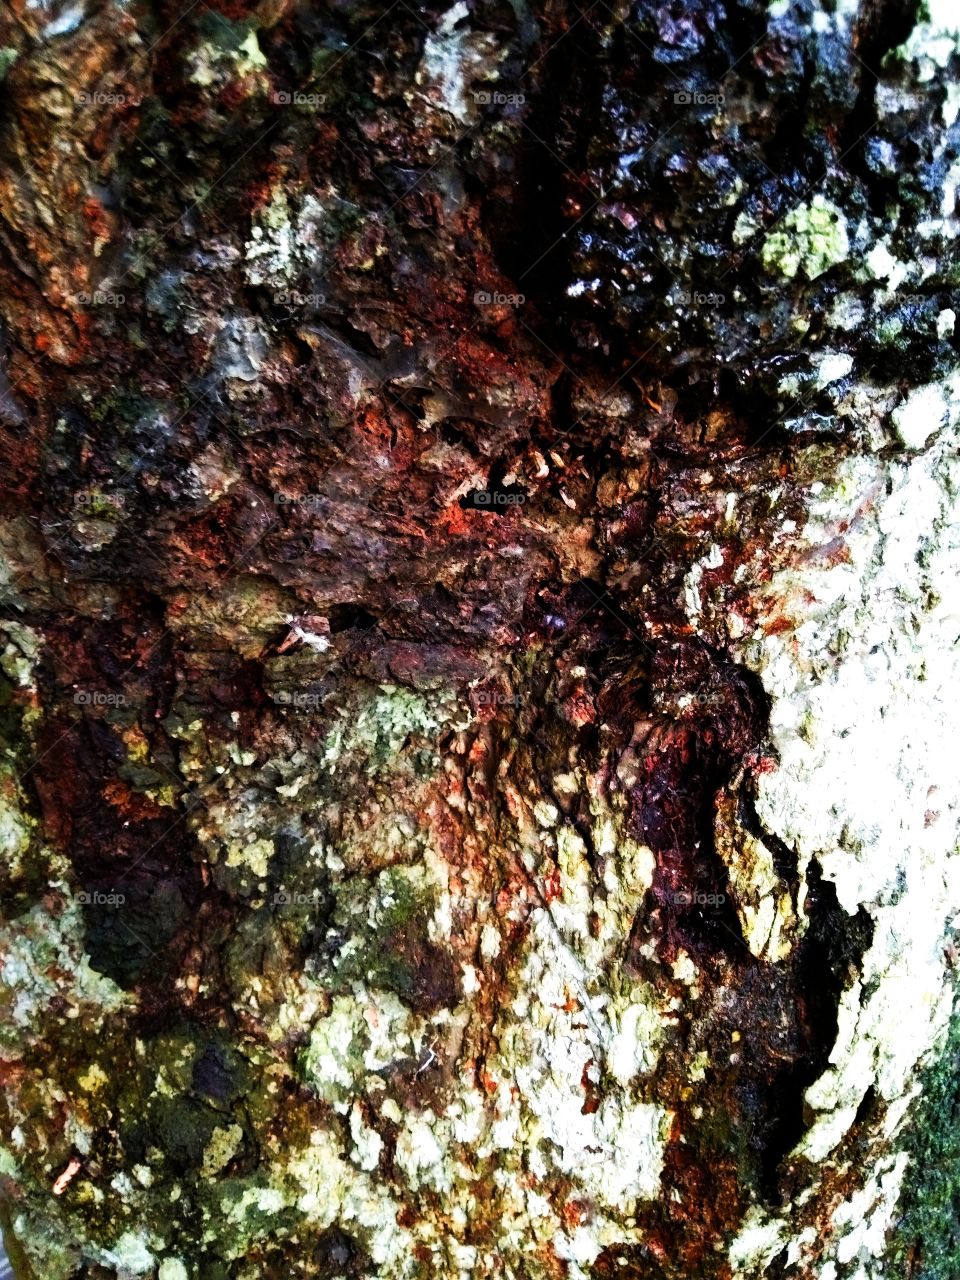 A Very Beautiful,Colourful& Designable Tree Texture.